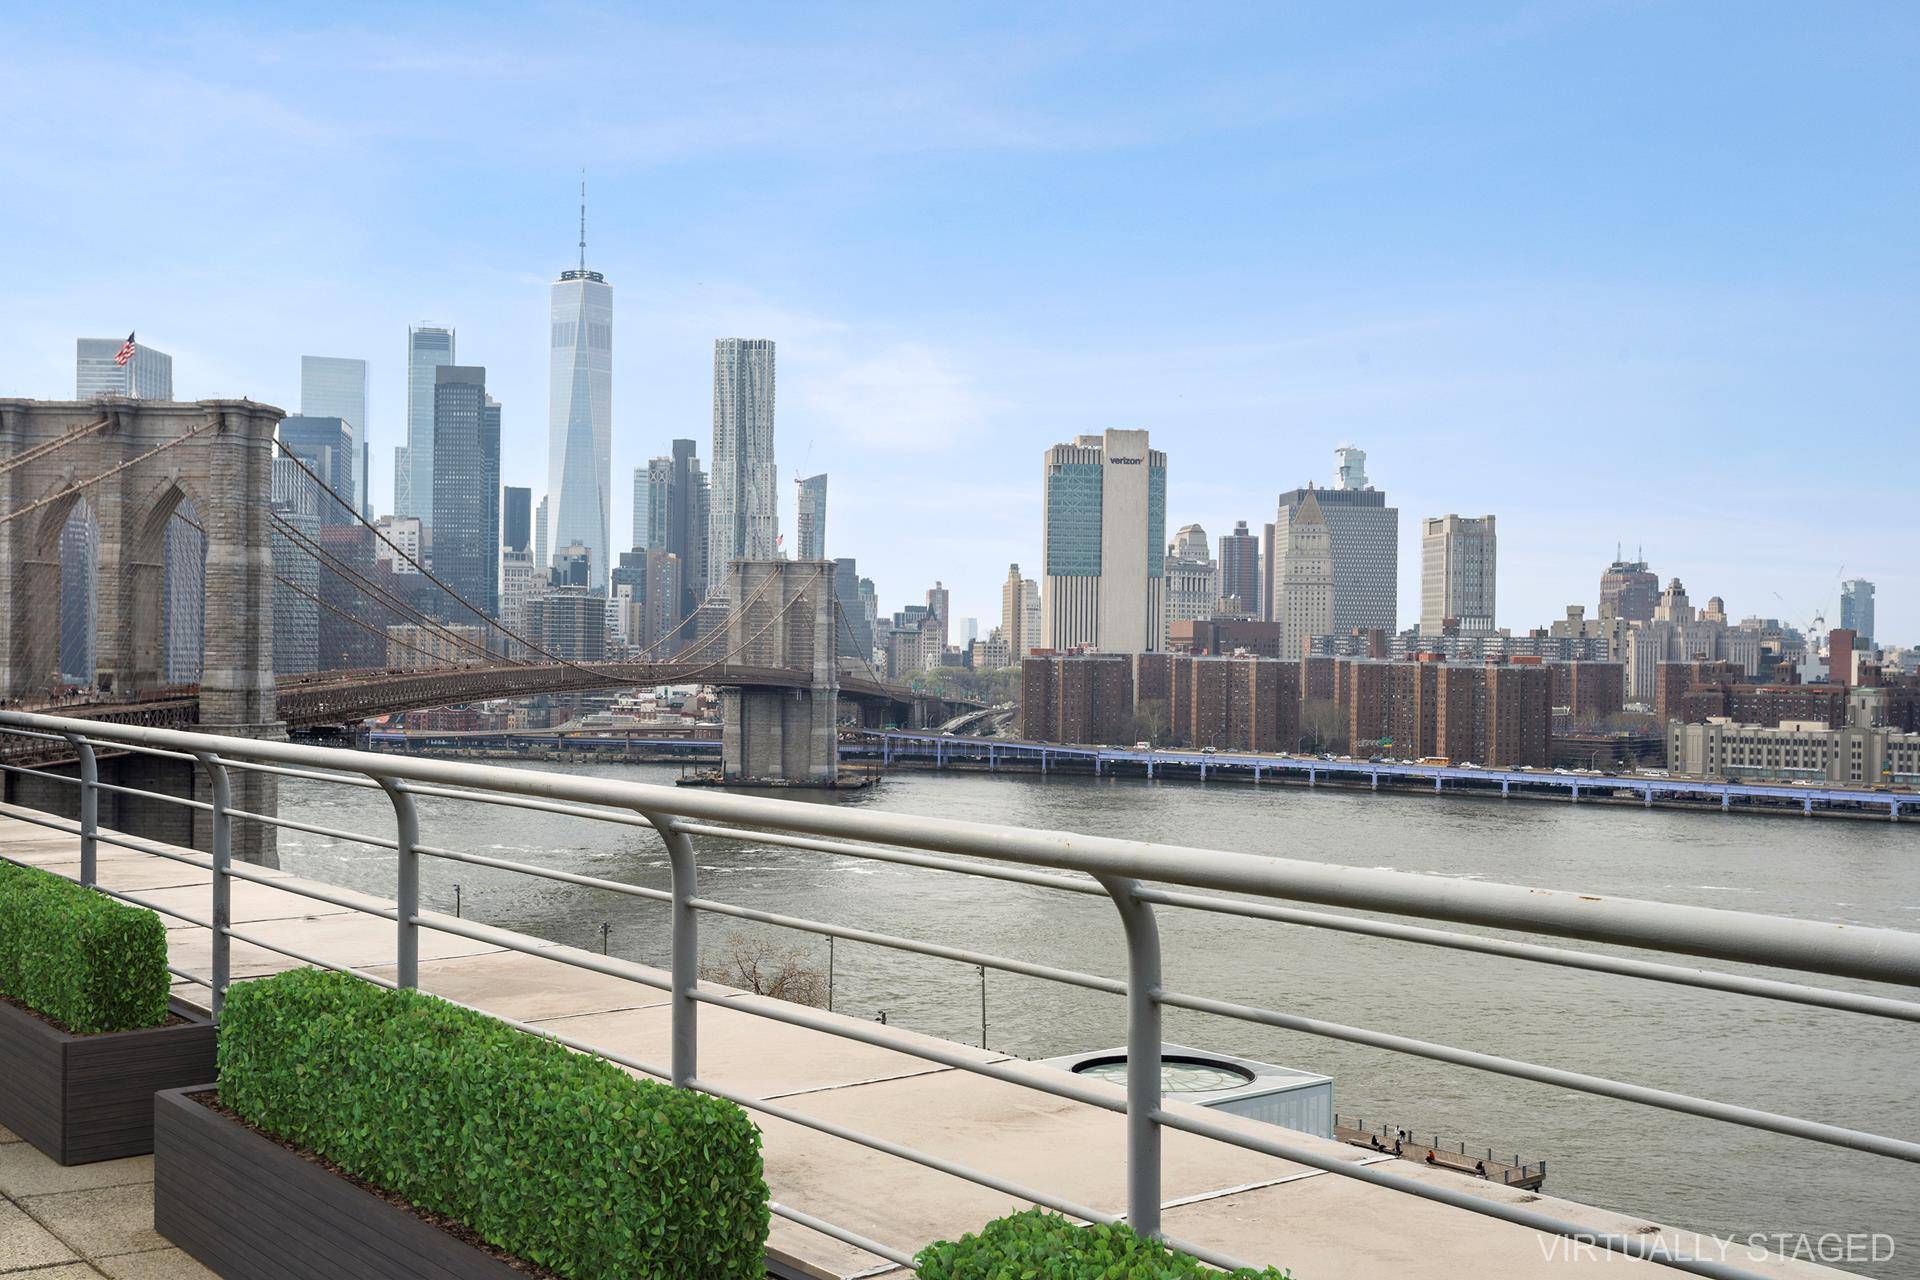 Expansive three bedroom Penthouse with private roof terrace in DUMBO.